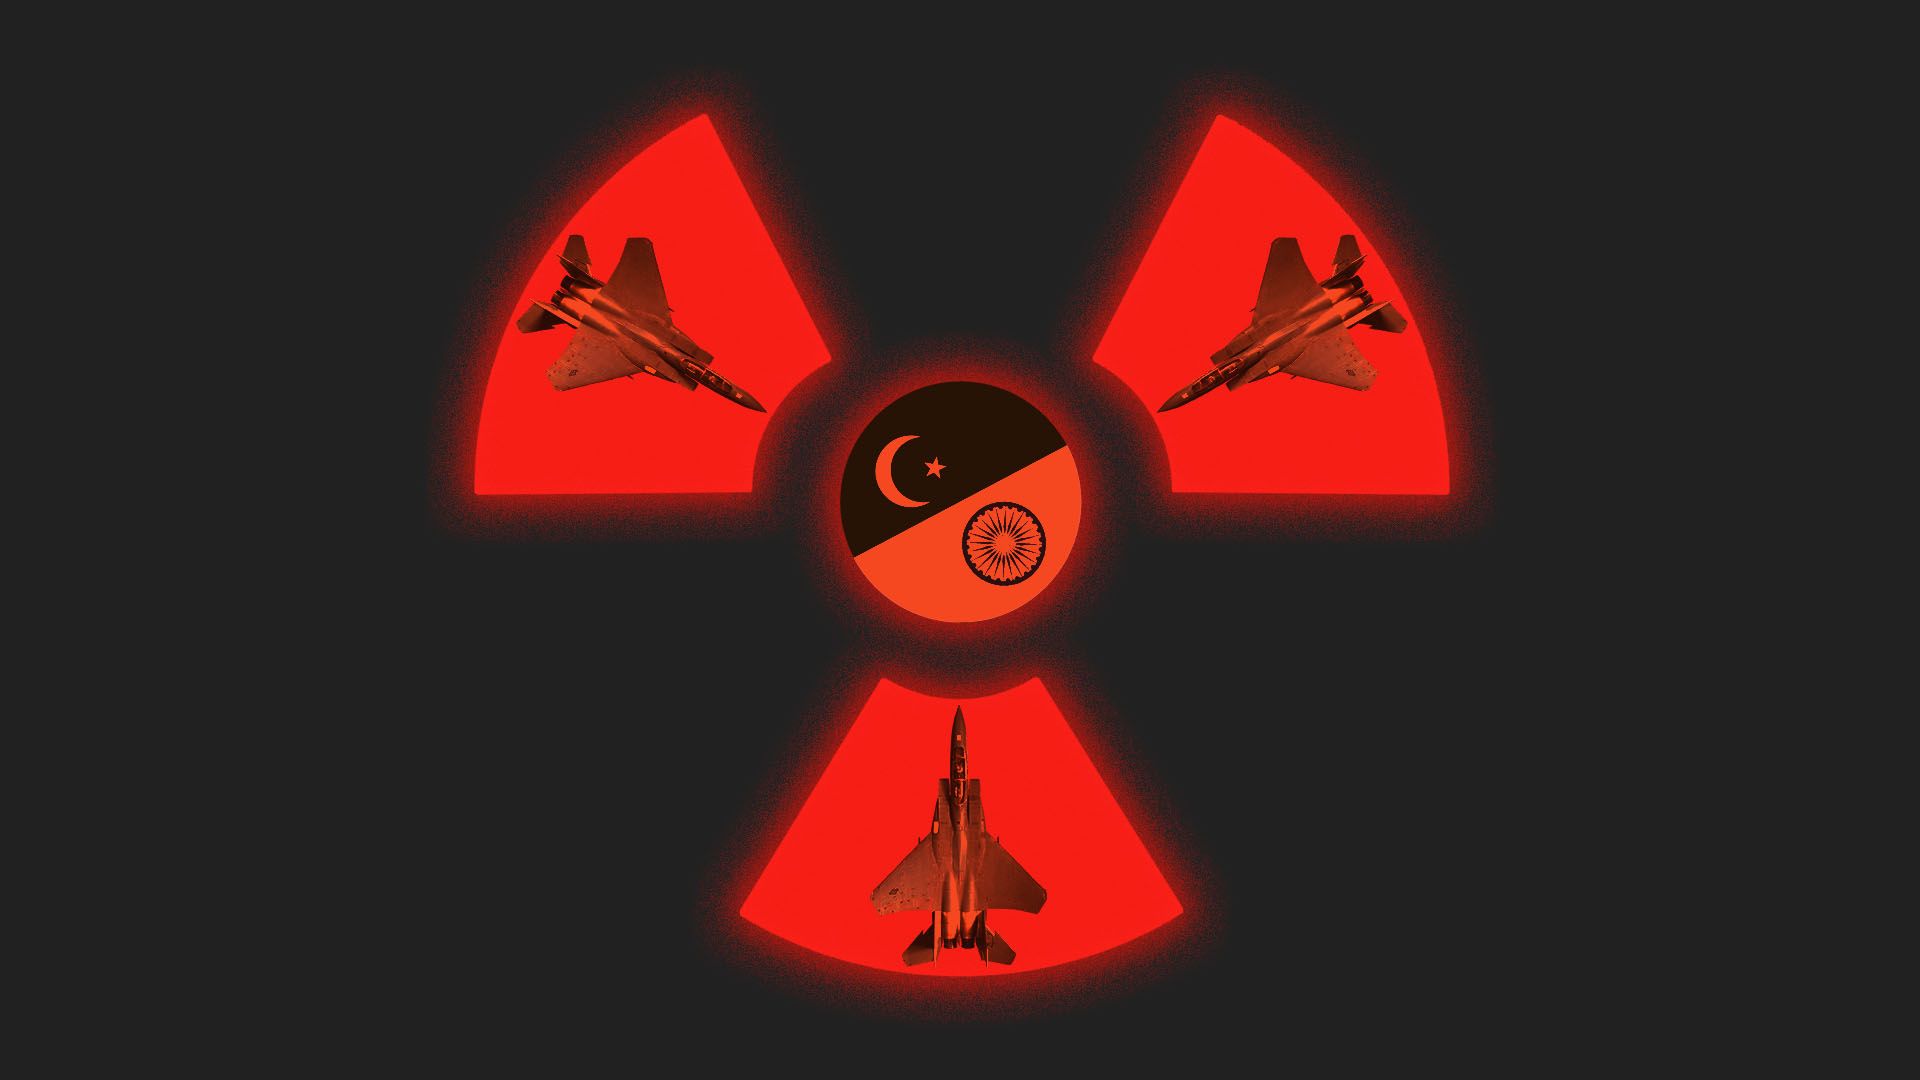 Illustration of nuclear war symbol made up of fighter jets and flags of Pakistan and India